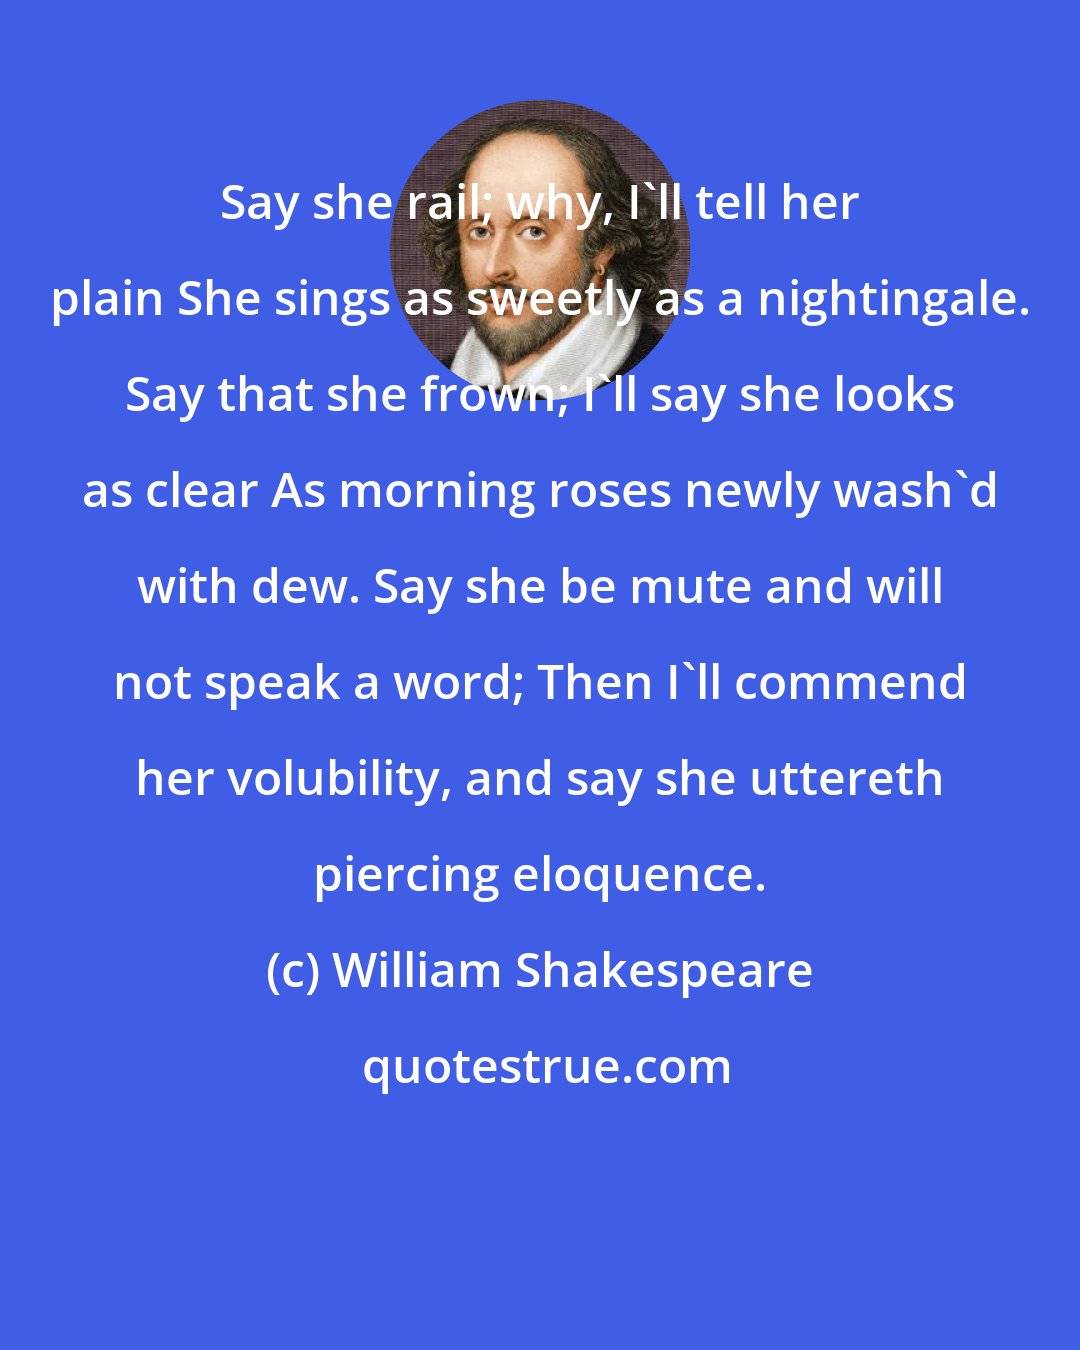 William Shakespeare: Say she rail; why, I'll tell her plain She sings as sweetly as a nightingale. Say that she frown; I'll say she looks as clear As morning roses newly wash'd with dew. Say she be mute and will not speak a word; Then I'll commend her volubility, and say she uttereth piercing eloquence.